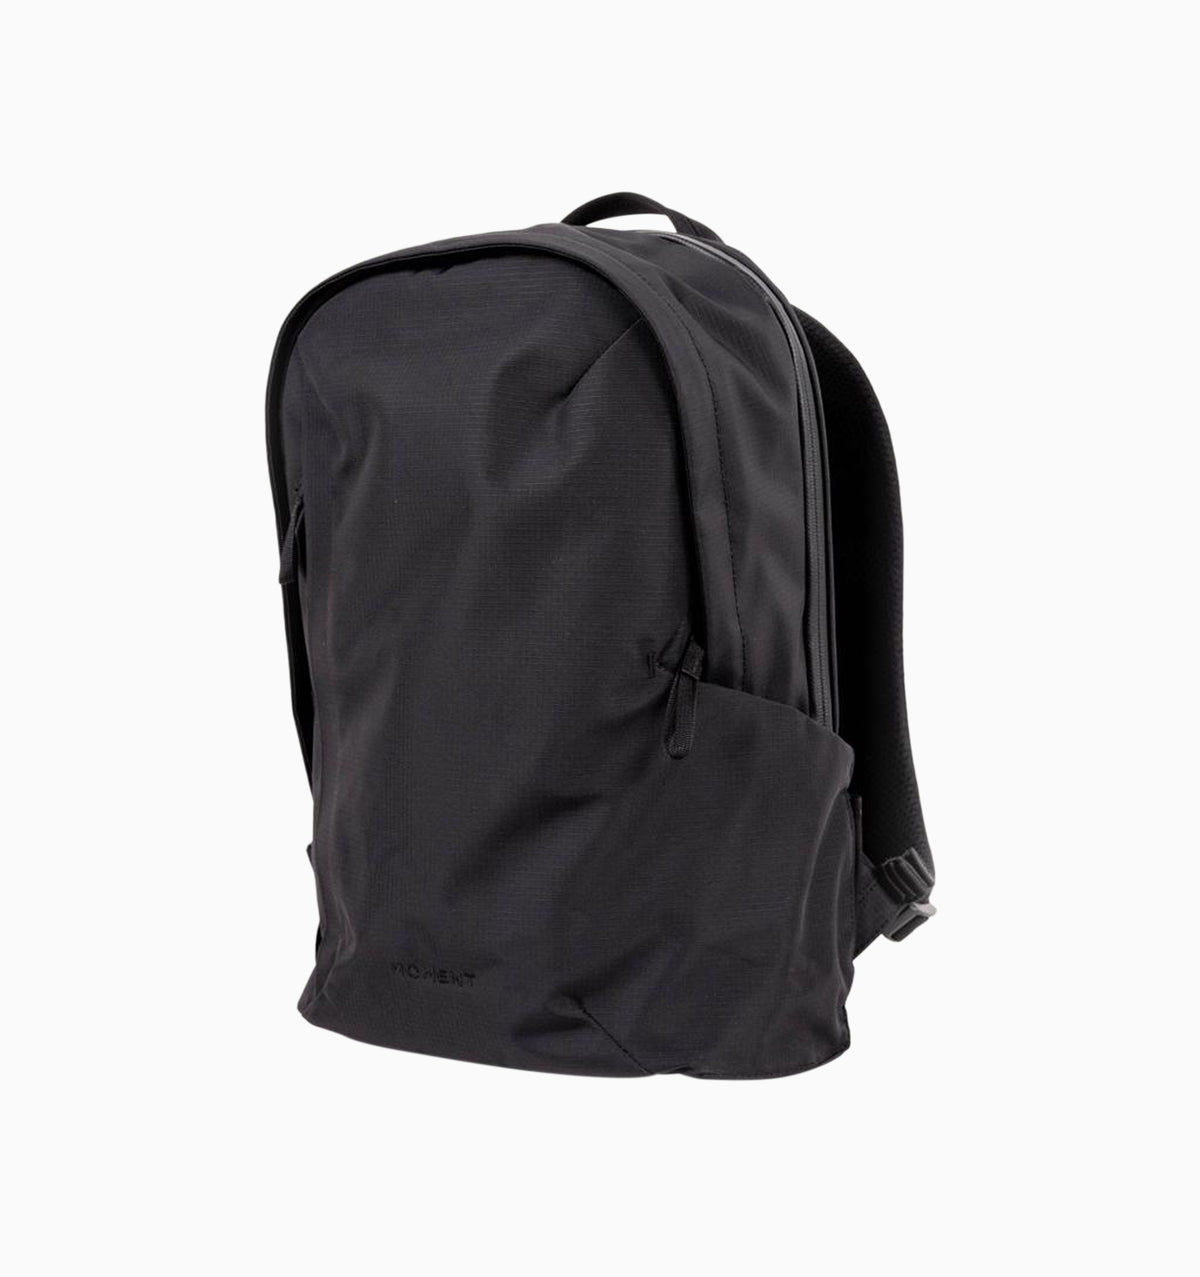 Moment 16" Everything Backpack 21L - Black